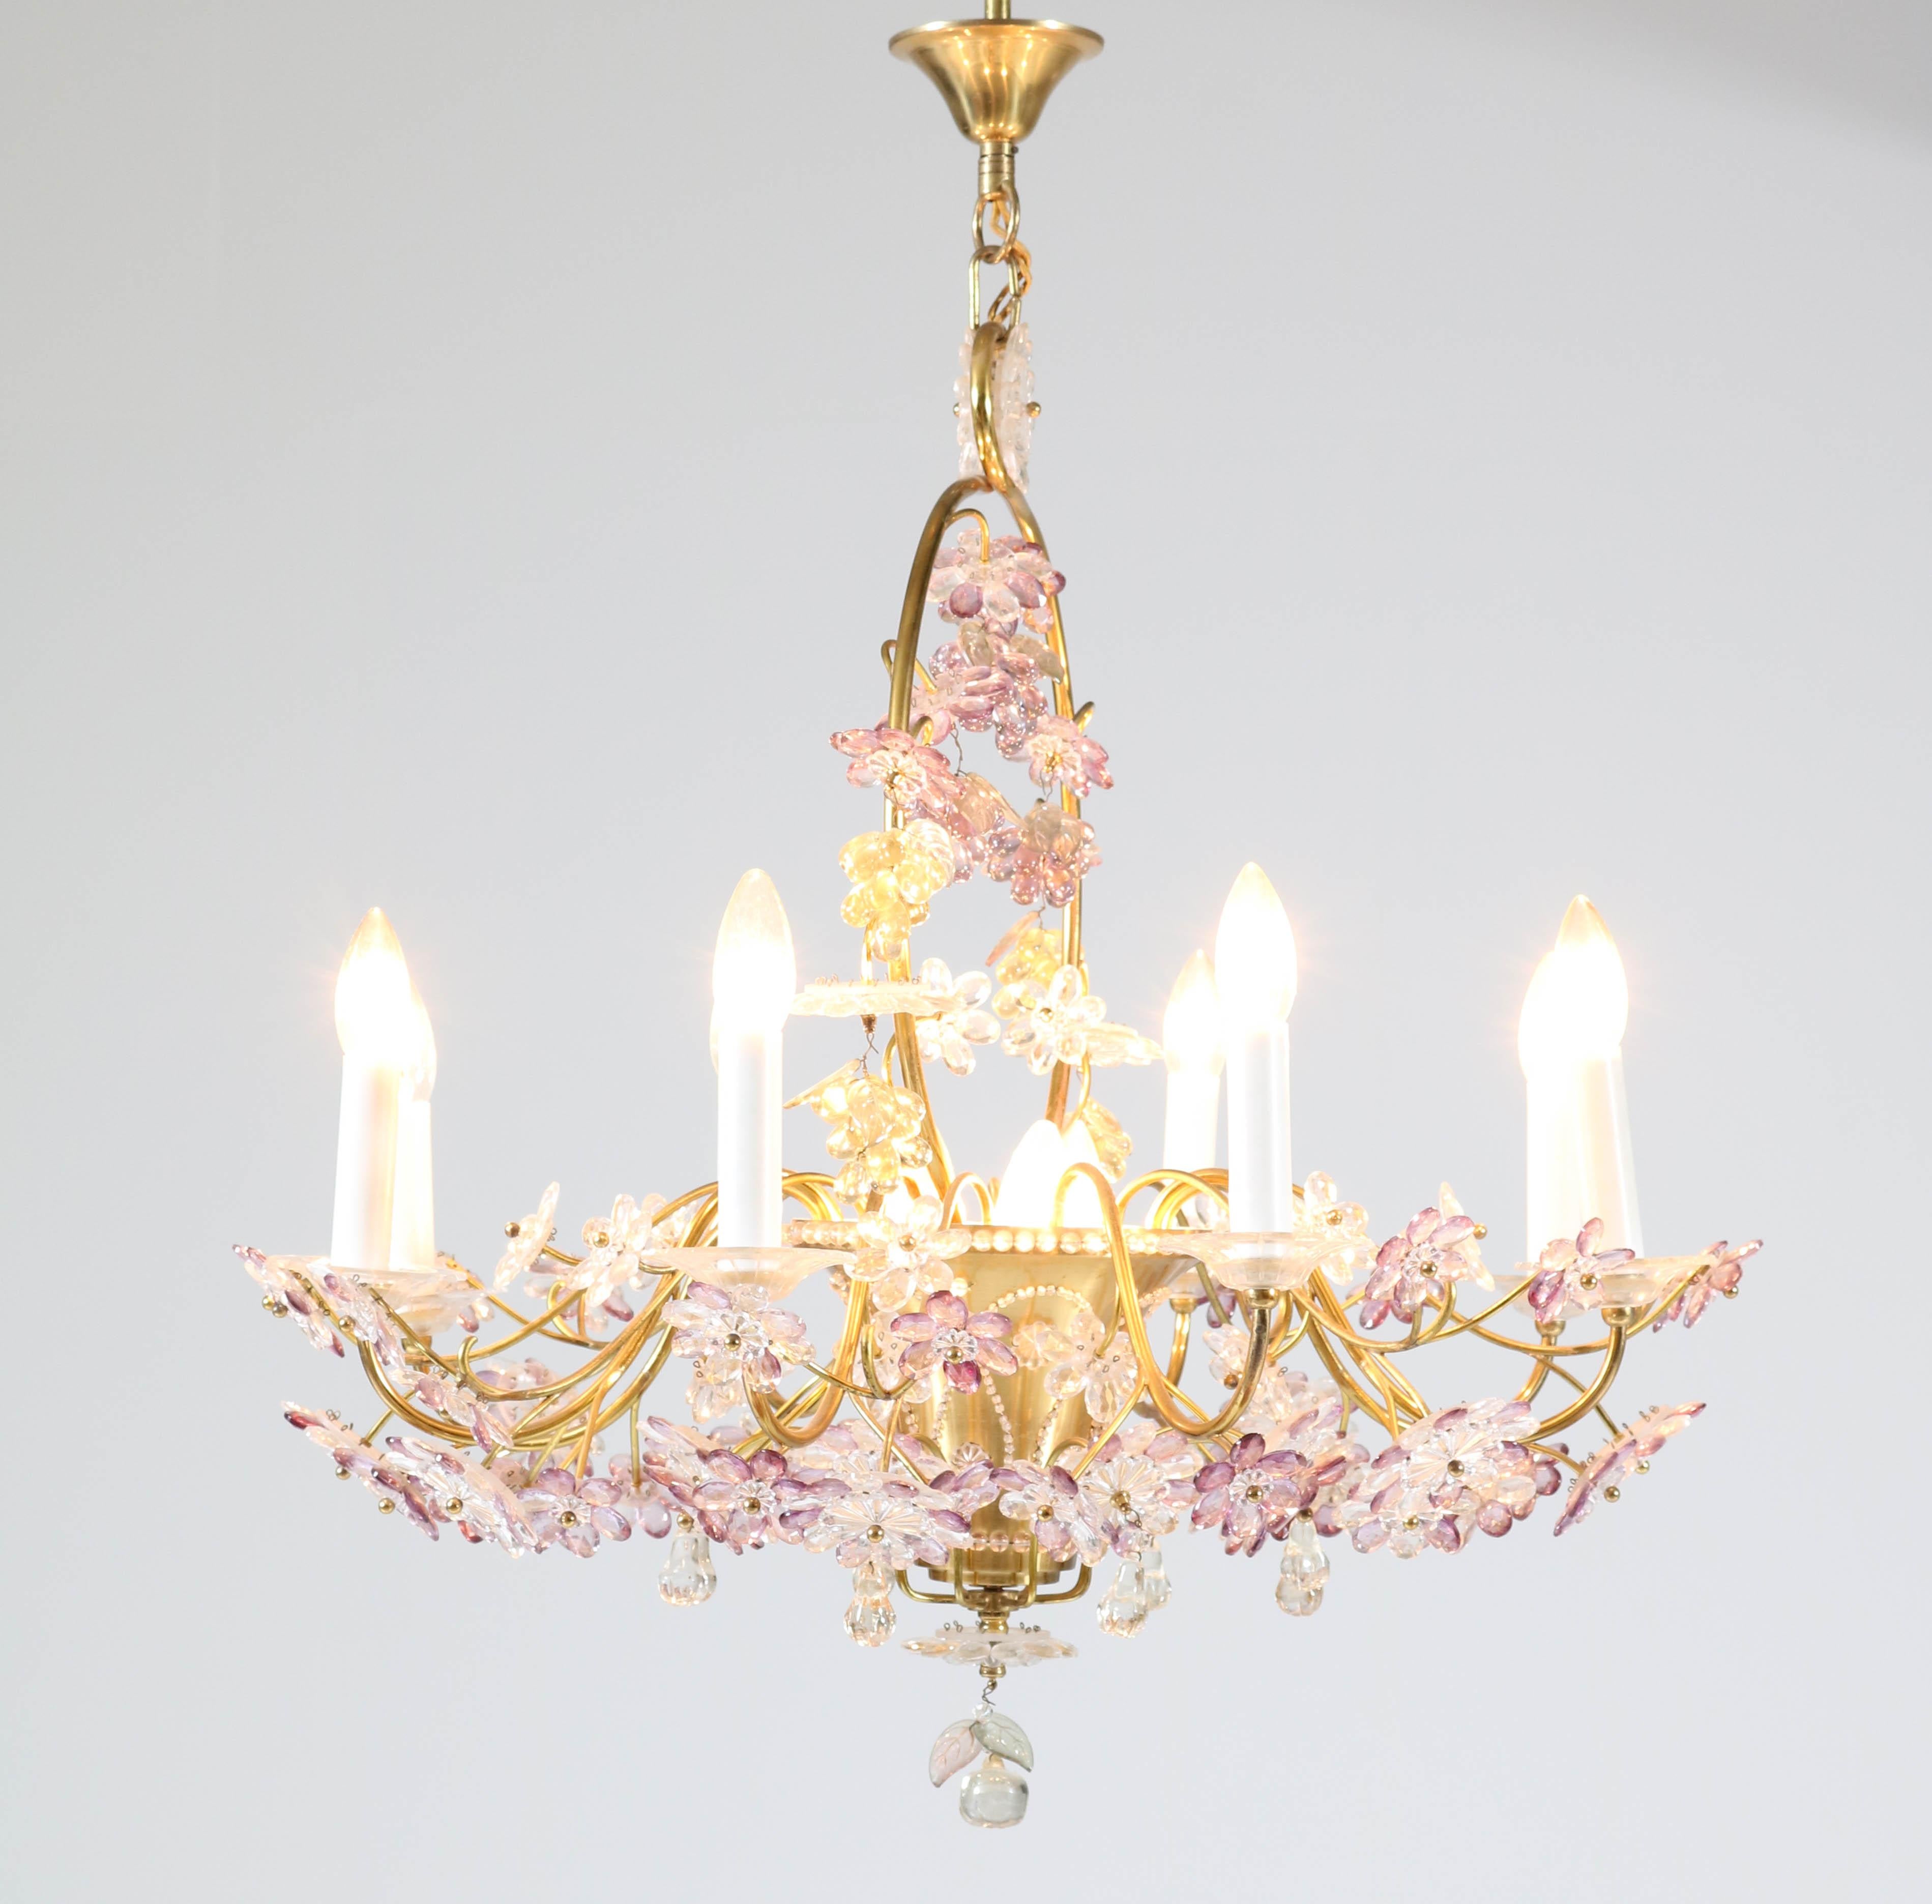 Magnificent and rare floral chandelier.
Design in the style Maison Baguès.
Striking French design from the 1950s.
Violet, pale green and clear crystal glass on gilt brass stems with a brass shade and ceiling cap.
Eleven sockets for E27